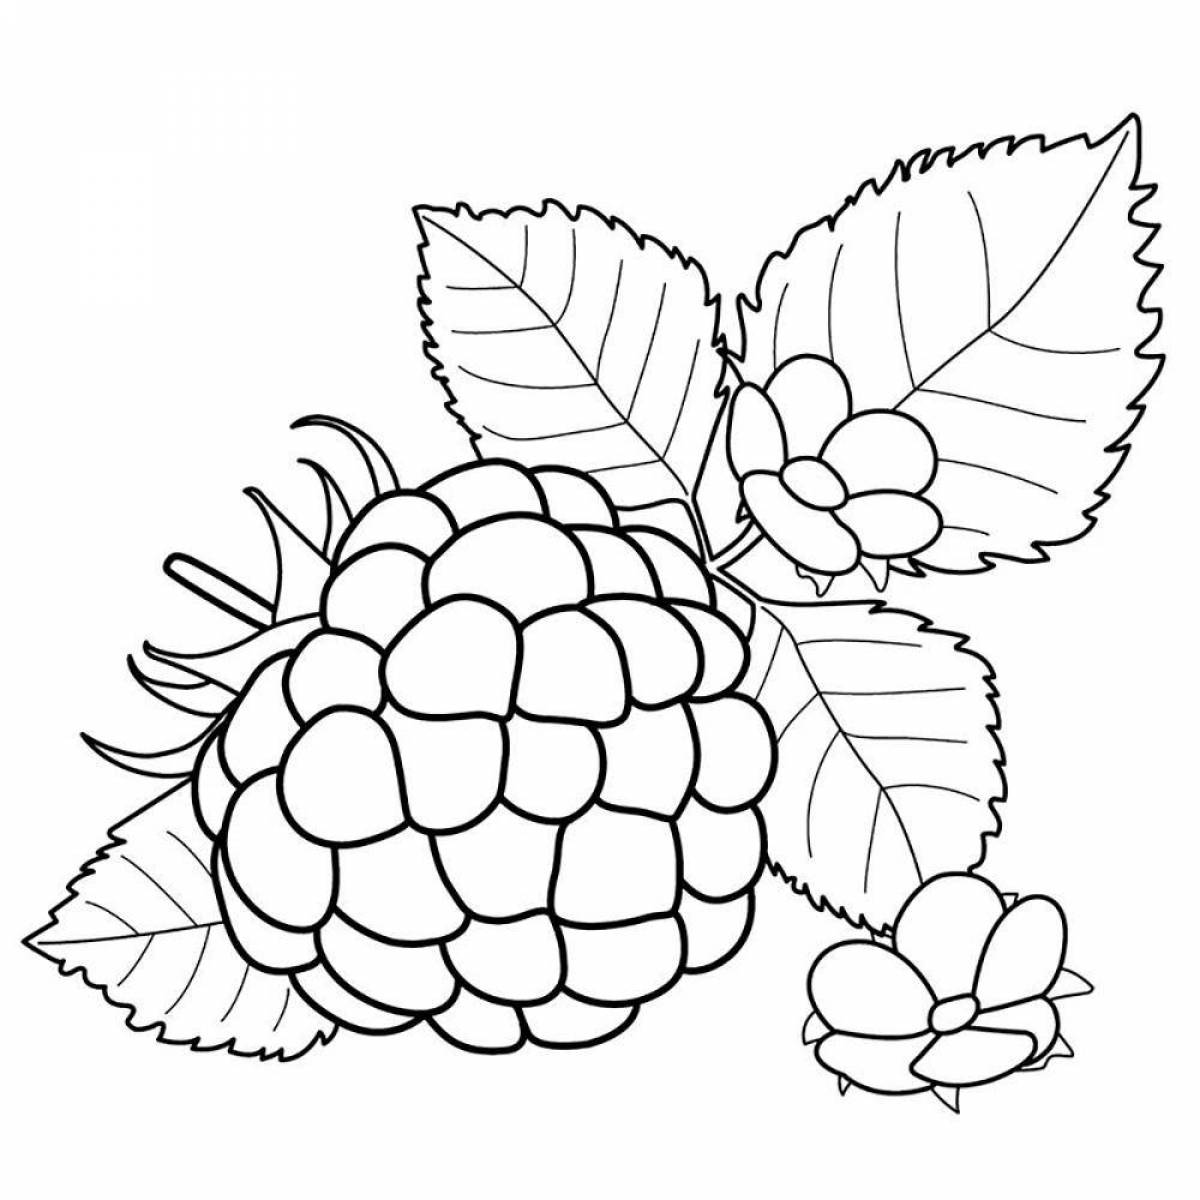 Attractive berries coloring book for kids